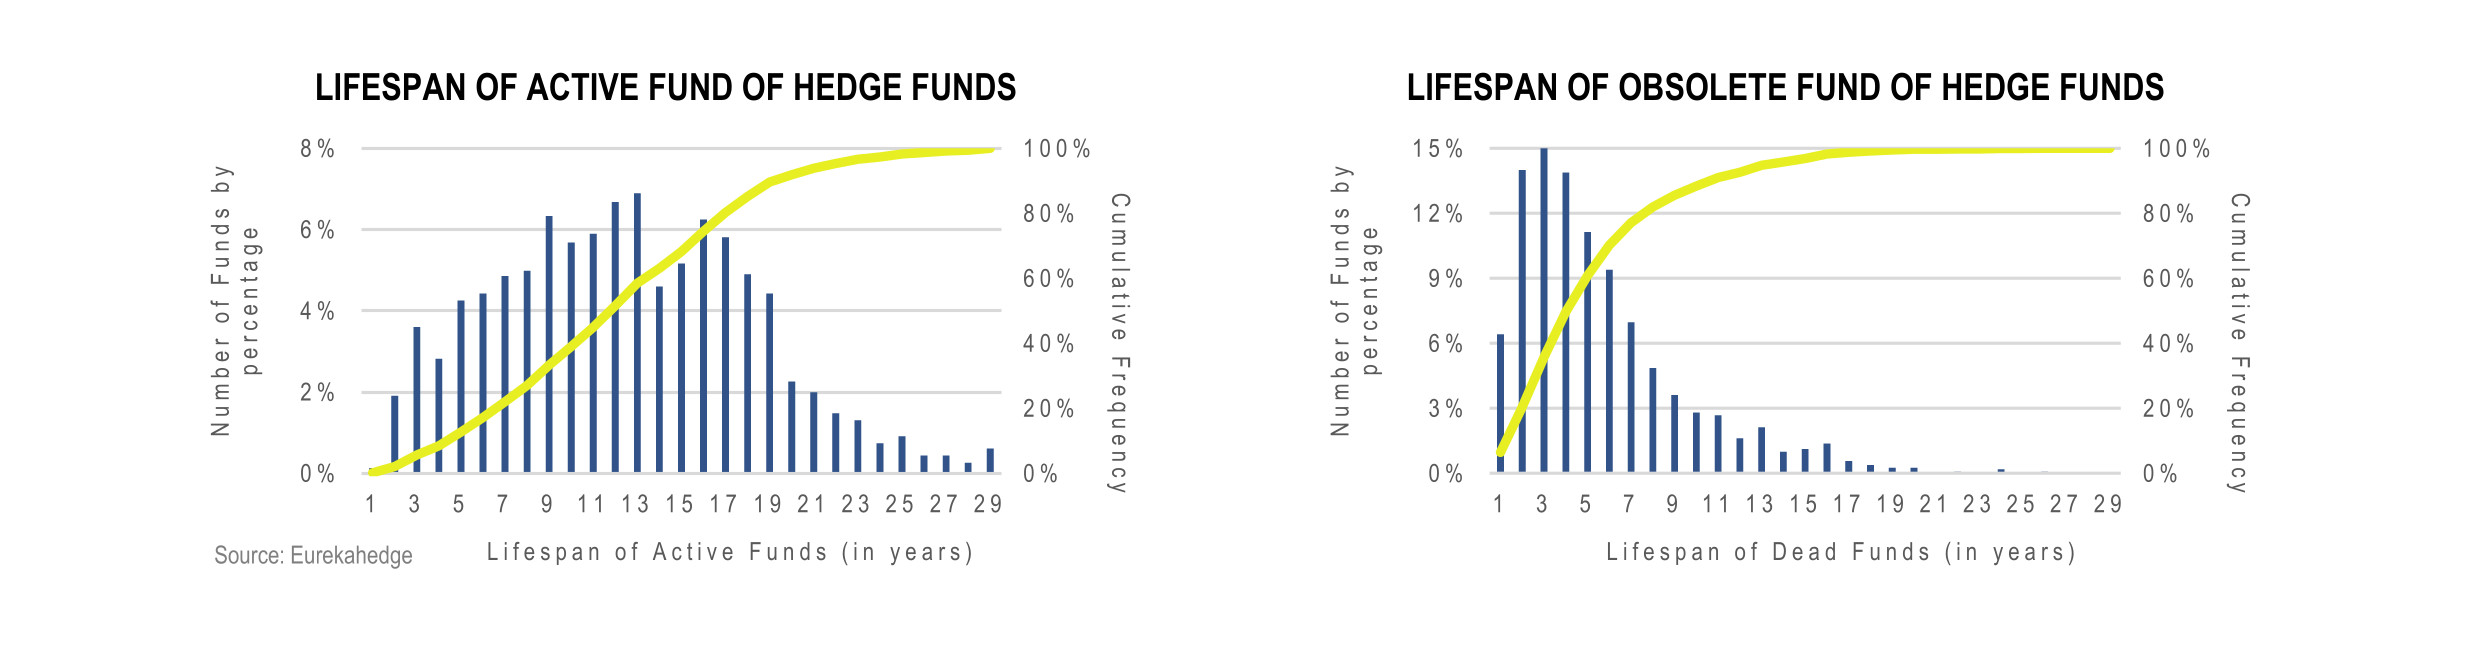 Fund of Hedge Funds Infographic June 2022 - funds by fund Lifespan